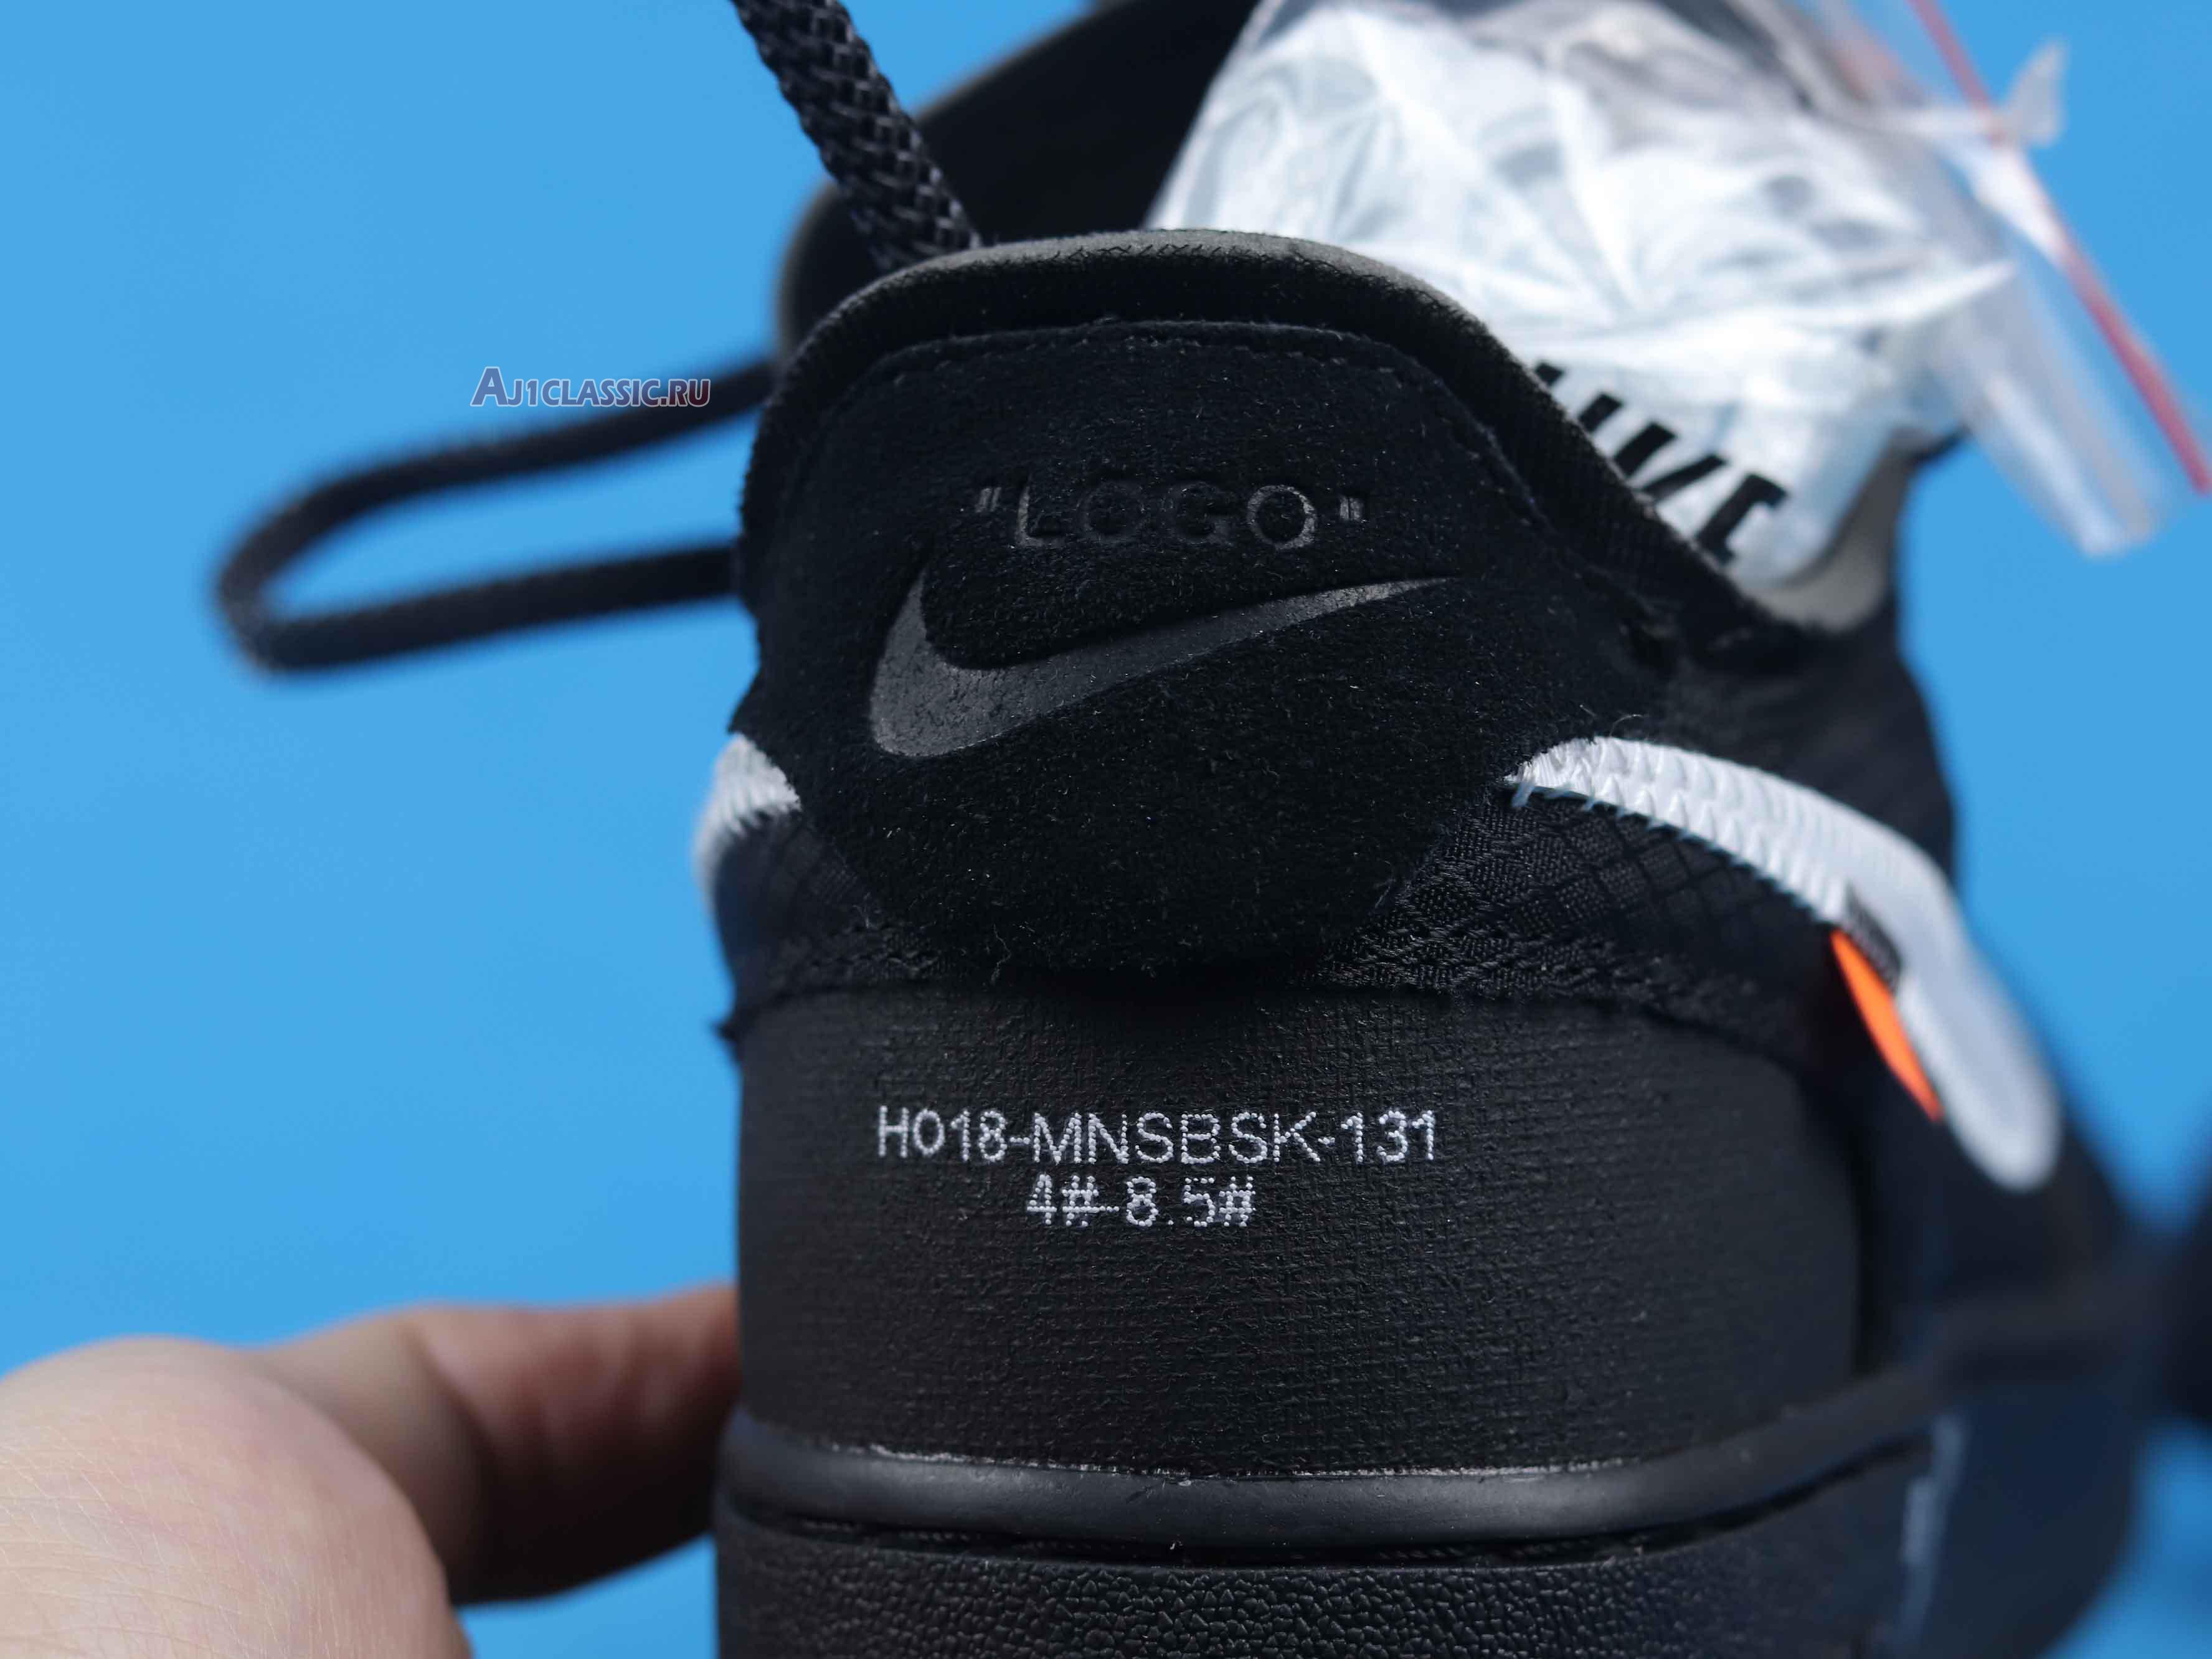 Off-White x Nike Air Force 1 Low "Black" AO4606-001